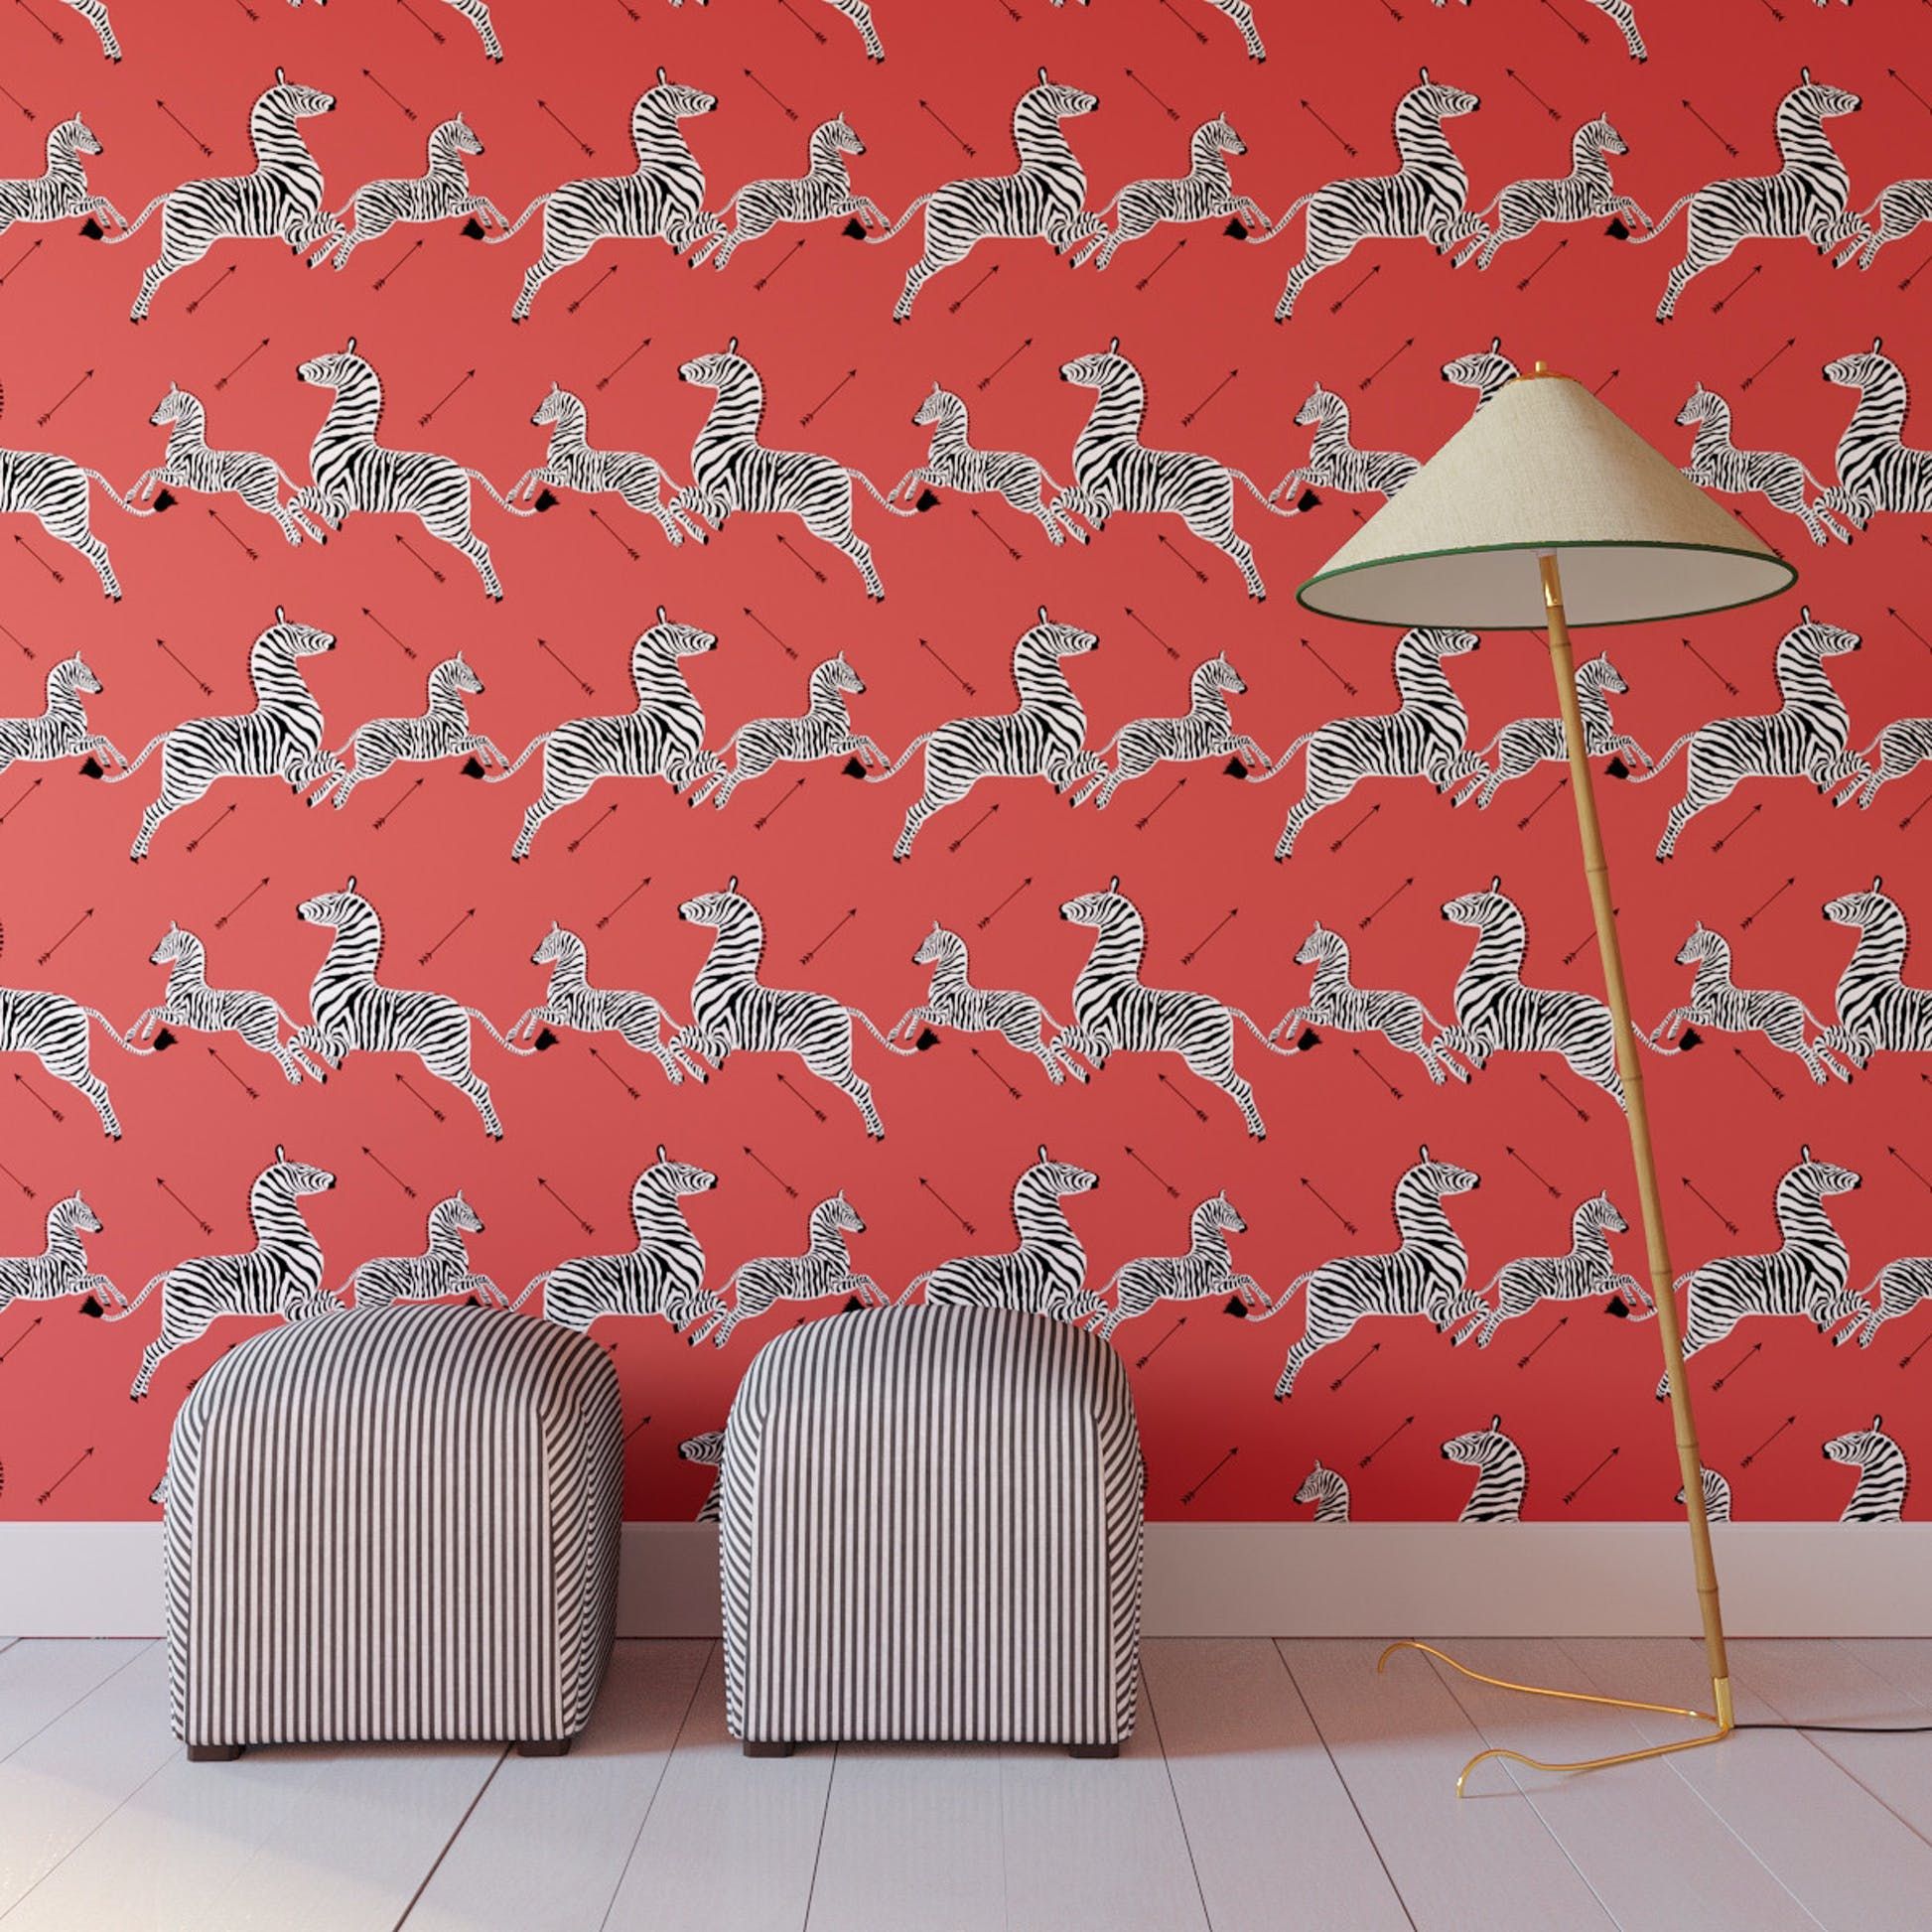 25 Best Removable Wallpapers - Easy Peel and Stick Wallpaper Design Ideas